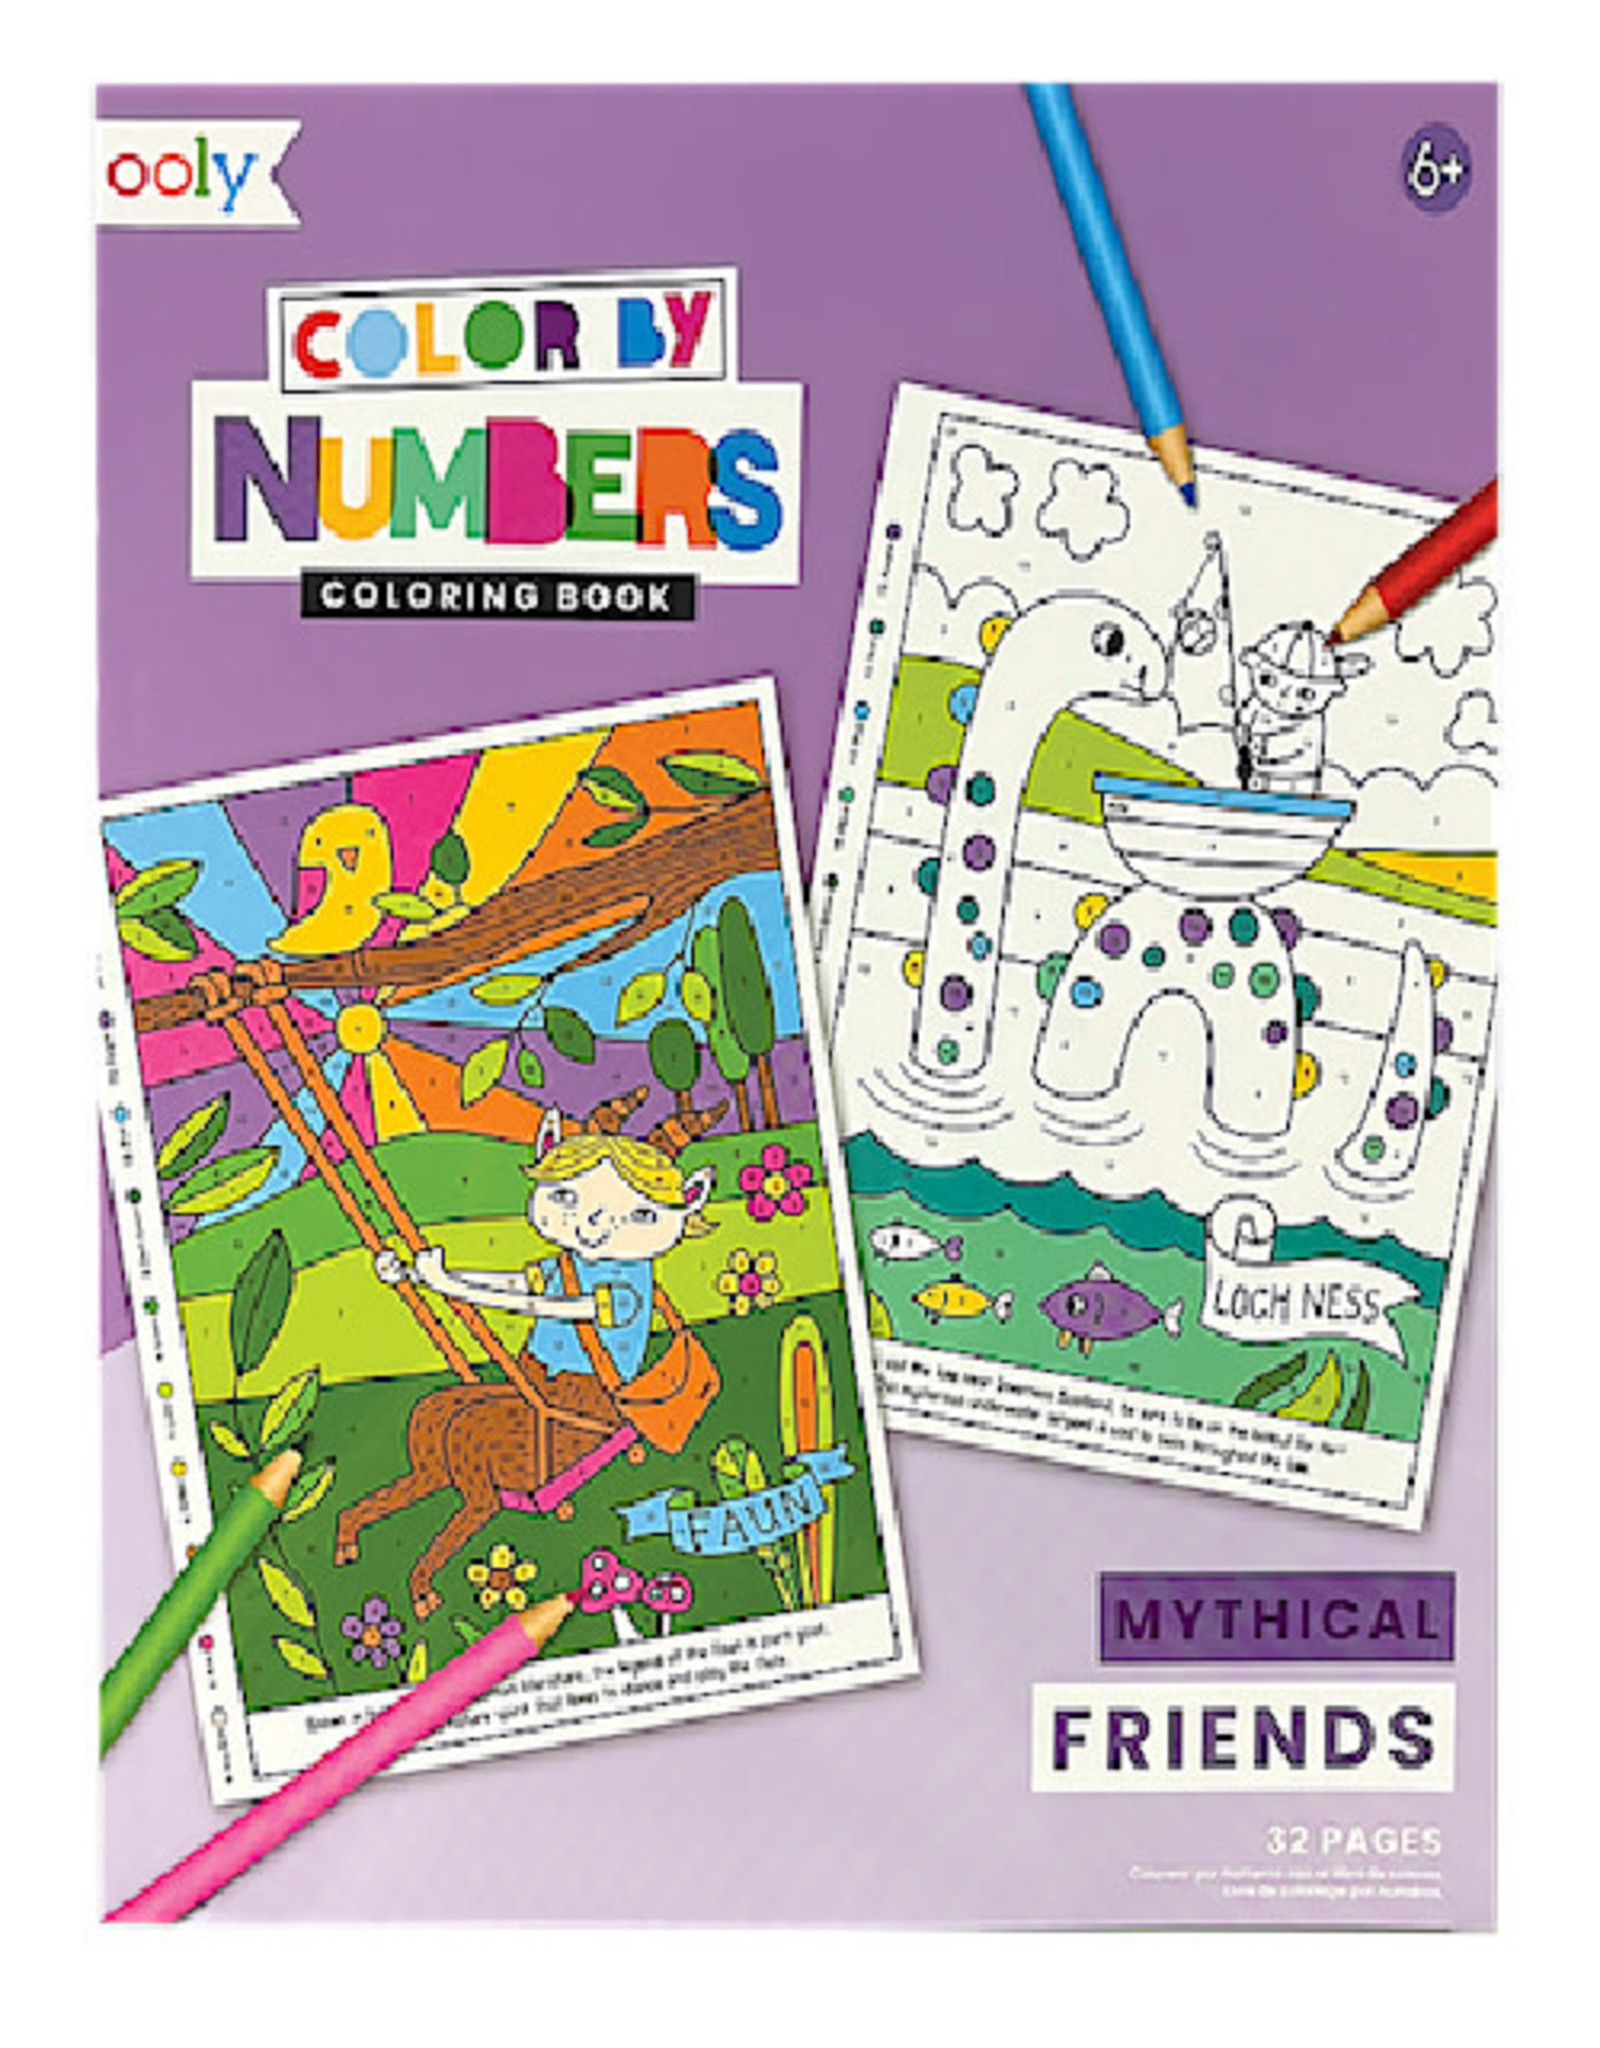 Ooly Color By Numbers Coloring Book - Mythical Friends